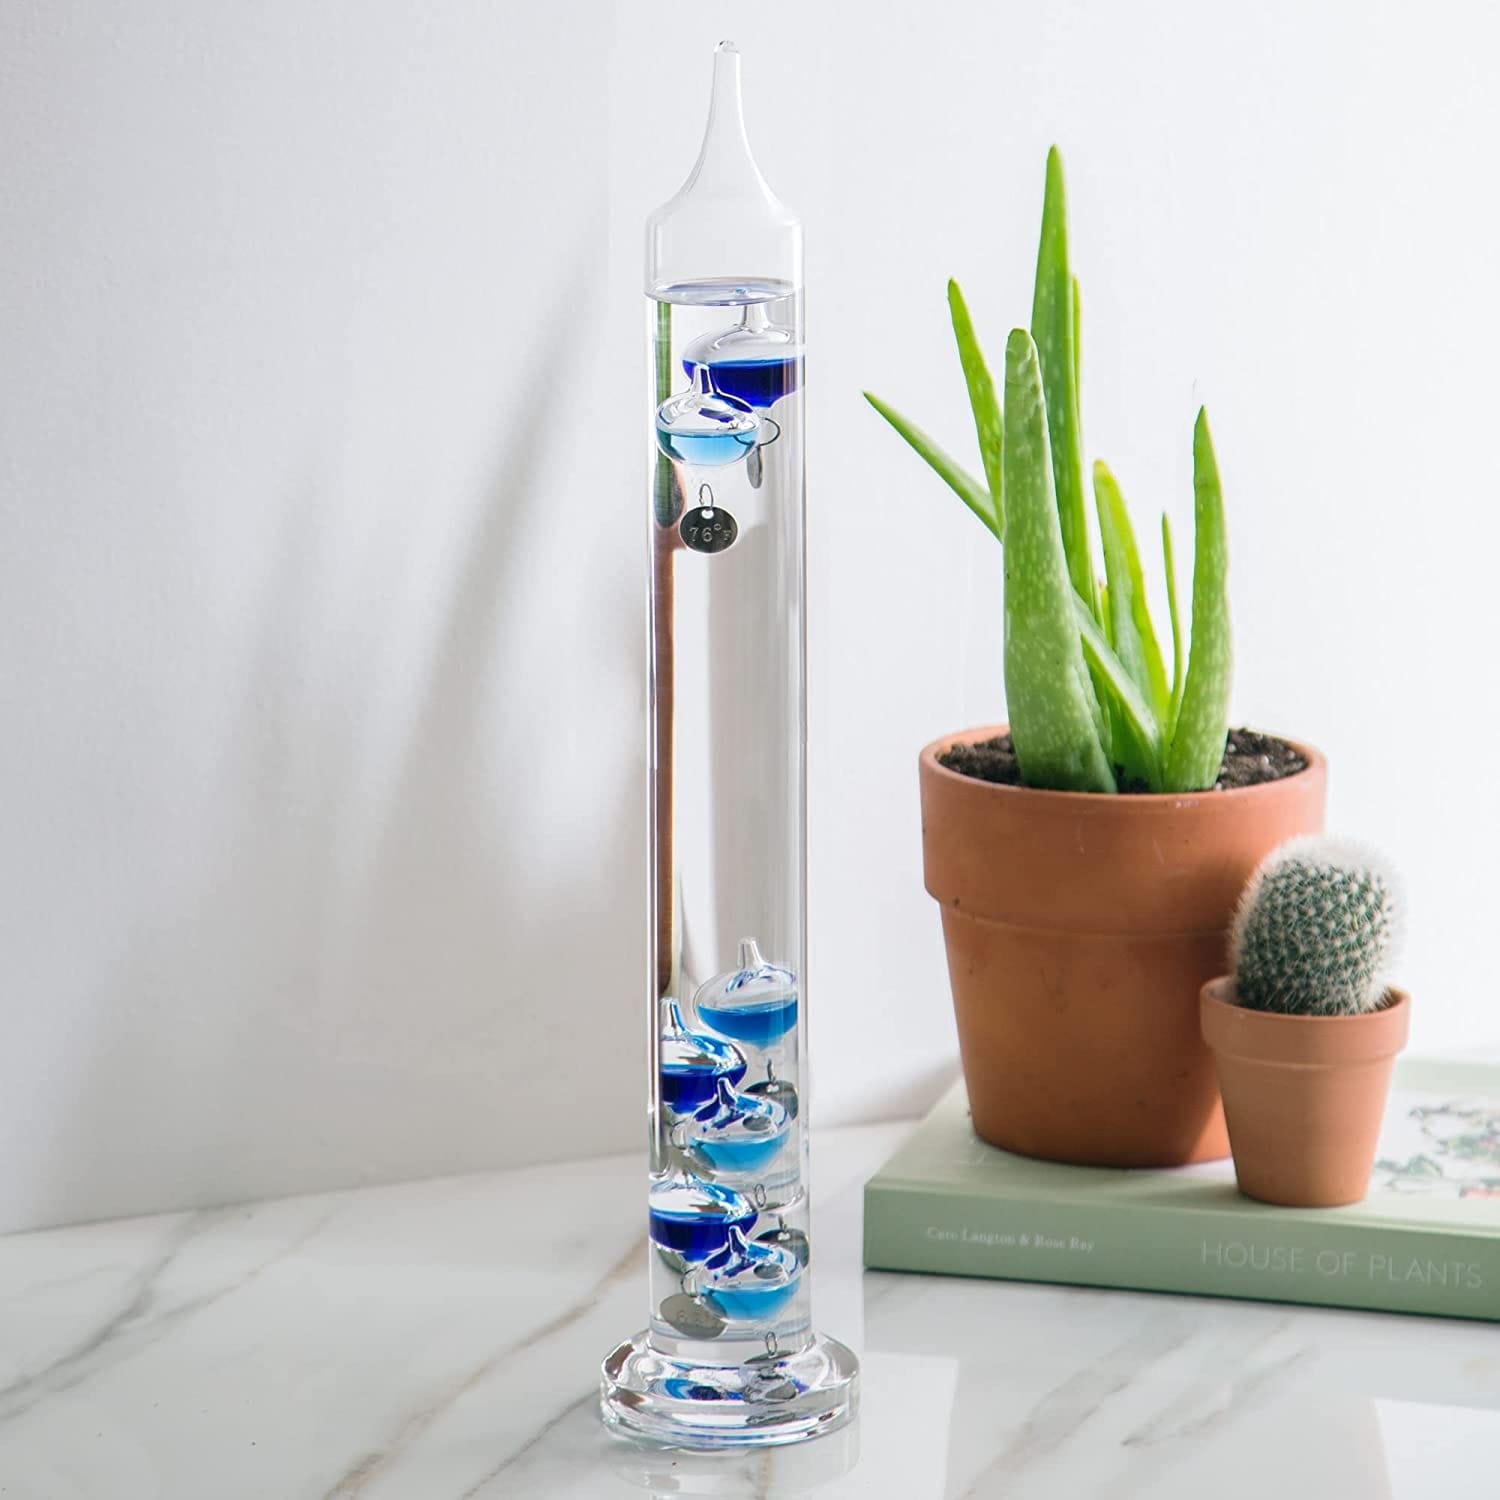 https://ak1.ostkcdn.com/images/products/is/images/direct/867f2c559ff086d8d13e8bf45d817026b9d285a1/Palais-Essentials-Galileo-Thermometer---Floating-Glass-Balls-Fahrenheit-Temperature-Indicator---Fun-and-Decorative.jpg